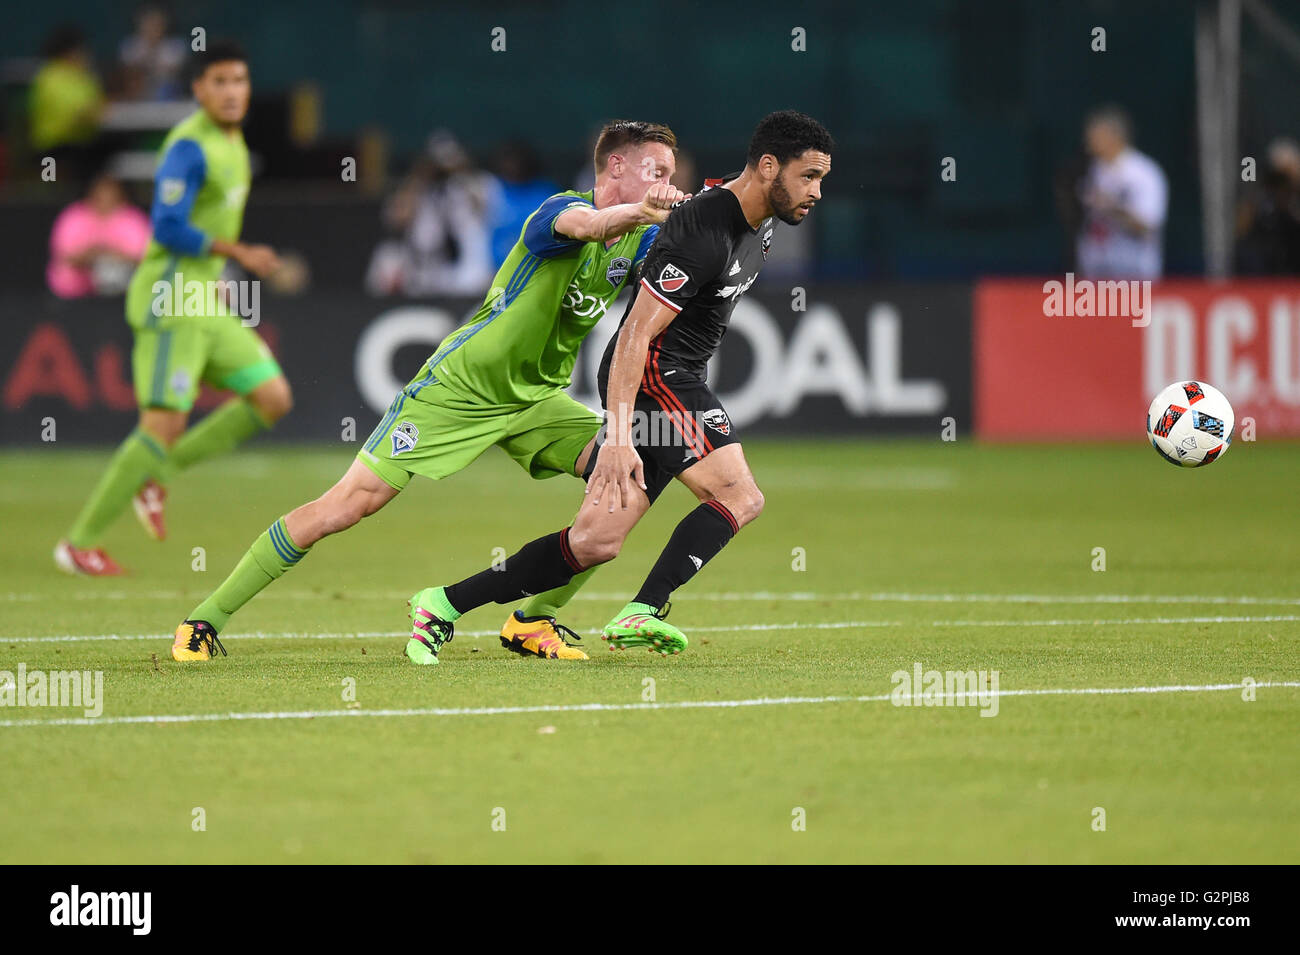 Washington DC, USA. 01st June, 2016. Seattle Sounders defender Dylan Remick (15) holds D.C. United midfielder Lamar Neagle (13) during the match between DC United and Seattle Sounders at RFK Stadium in Washington DC. The Sounders defeated DC 2-0. John Middlebrook/CSM/Alamy Live News Stock Photo